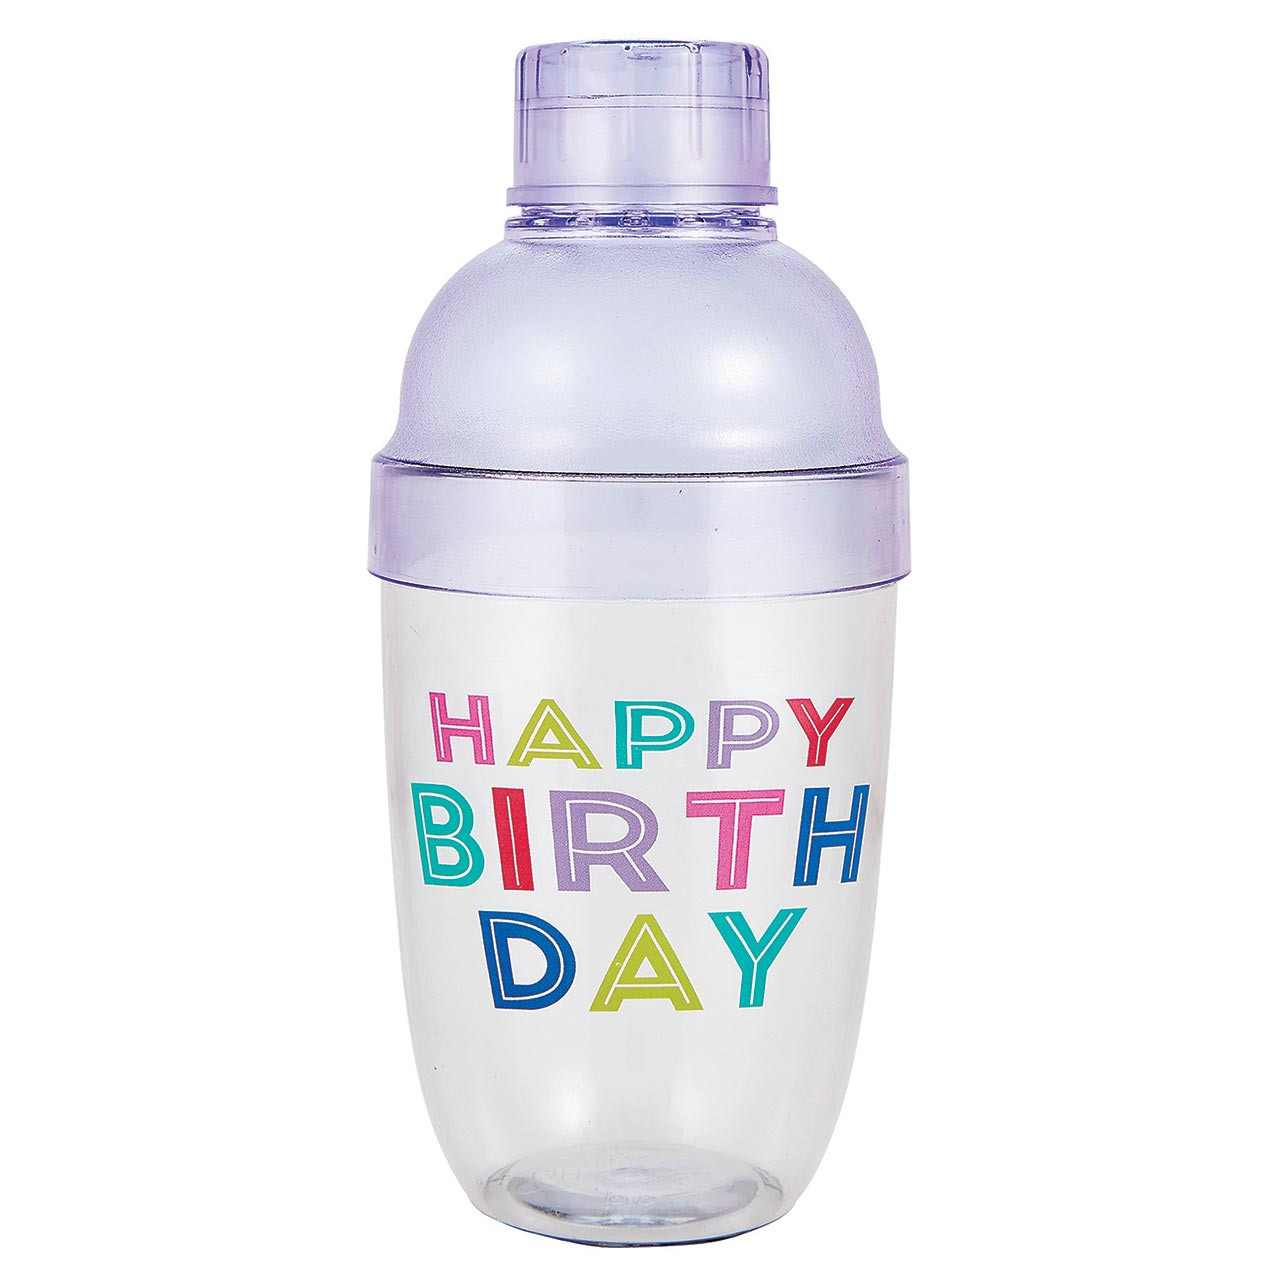 Cocktail Shaker Set - Happy Birthday - Slant Collections